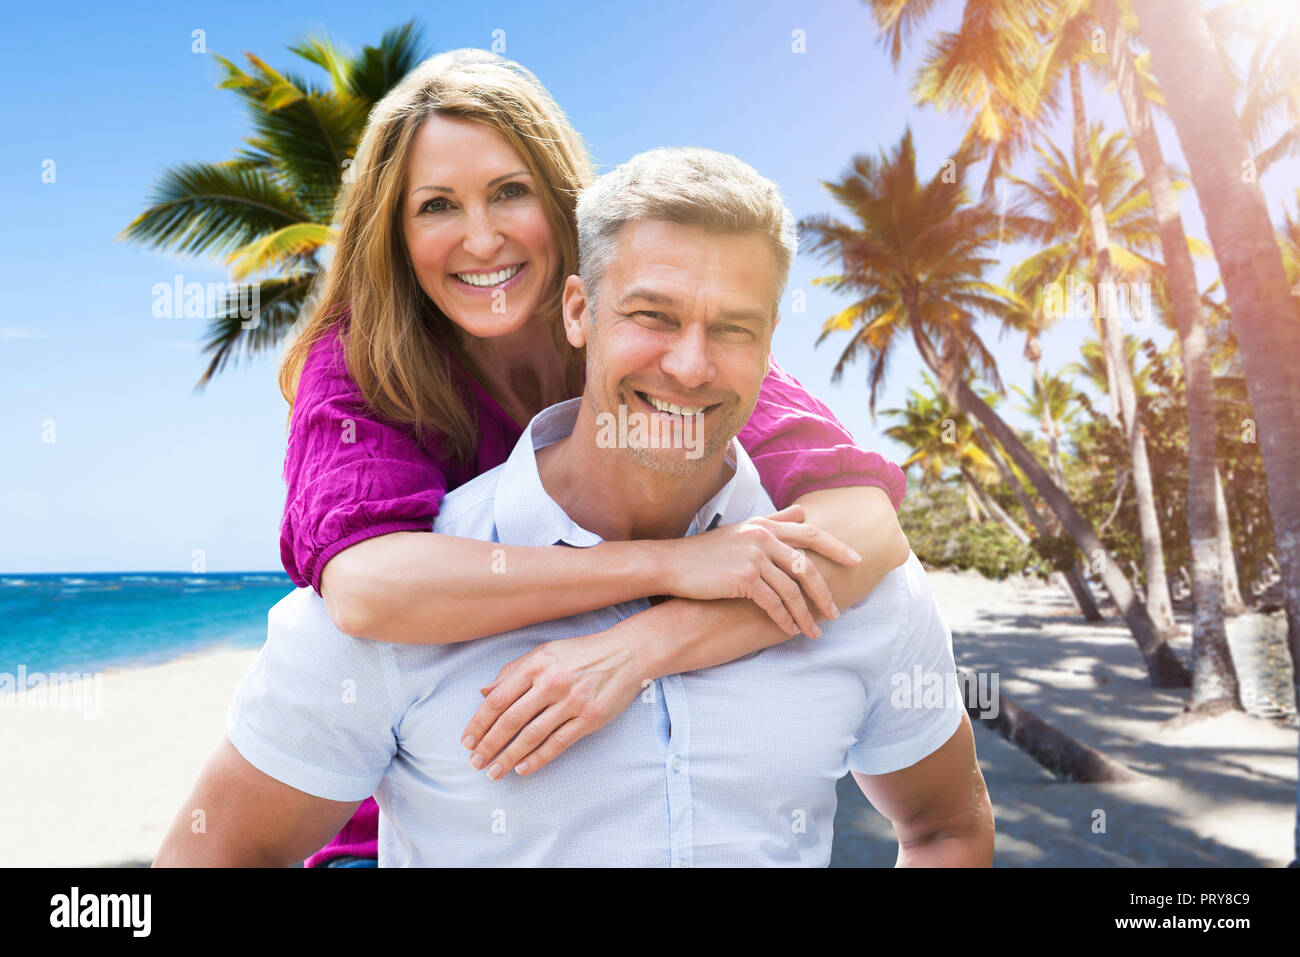 Portrait Of A Smiling Mature Man Giving Piggyback To His Wife At Beach Stock Photo